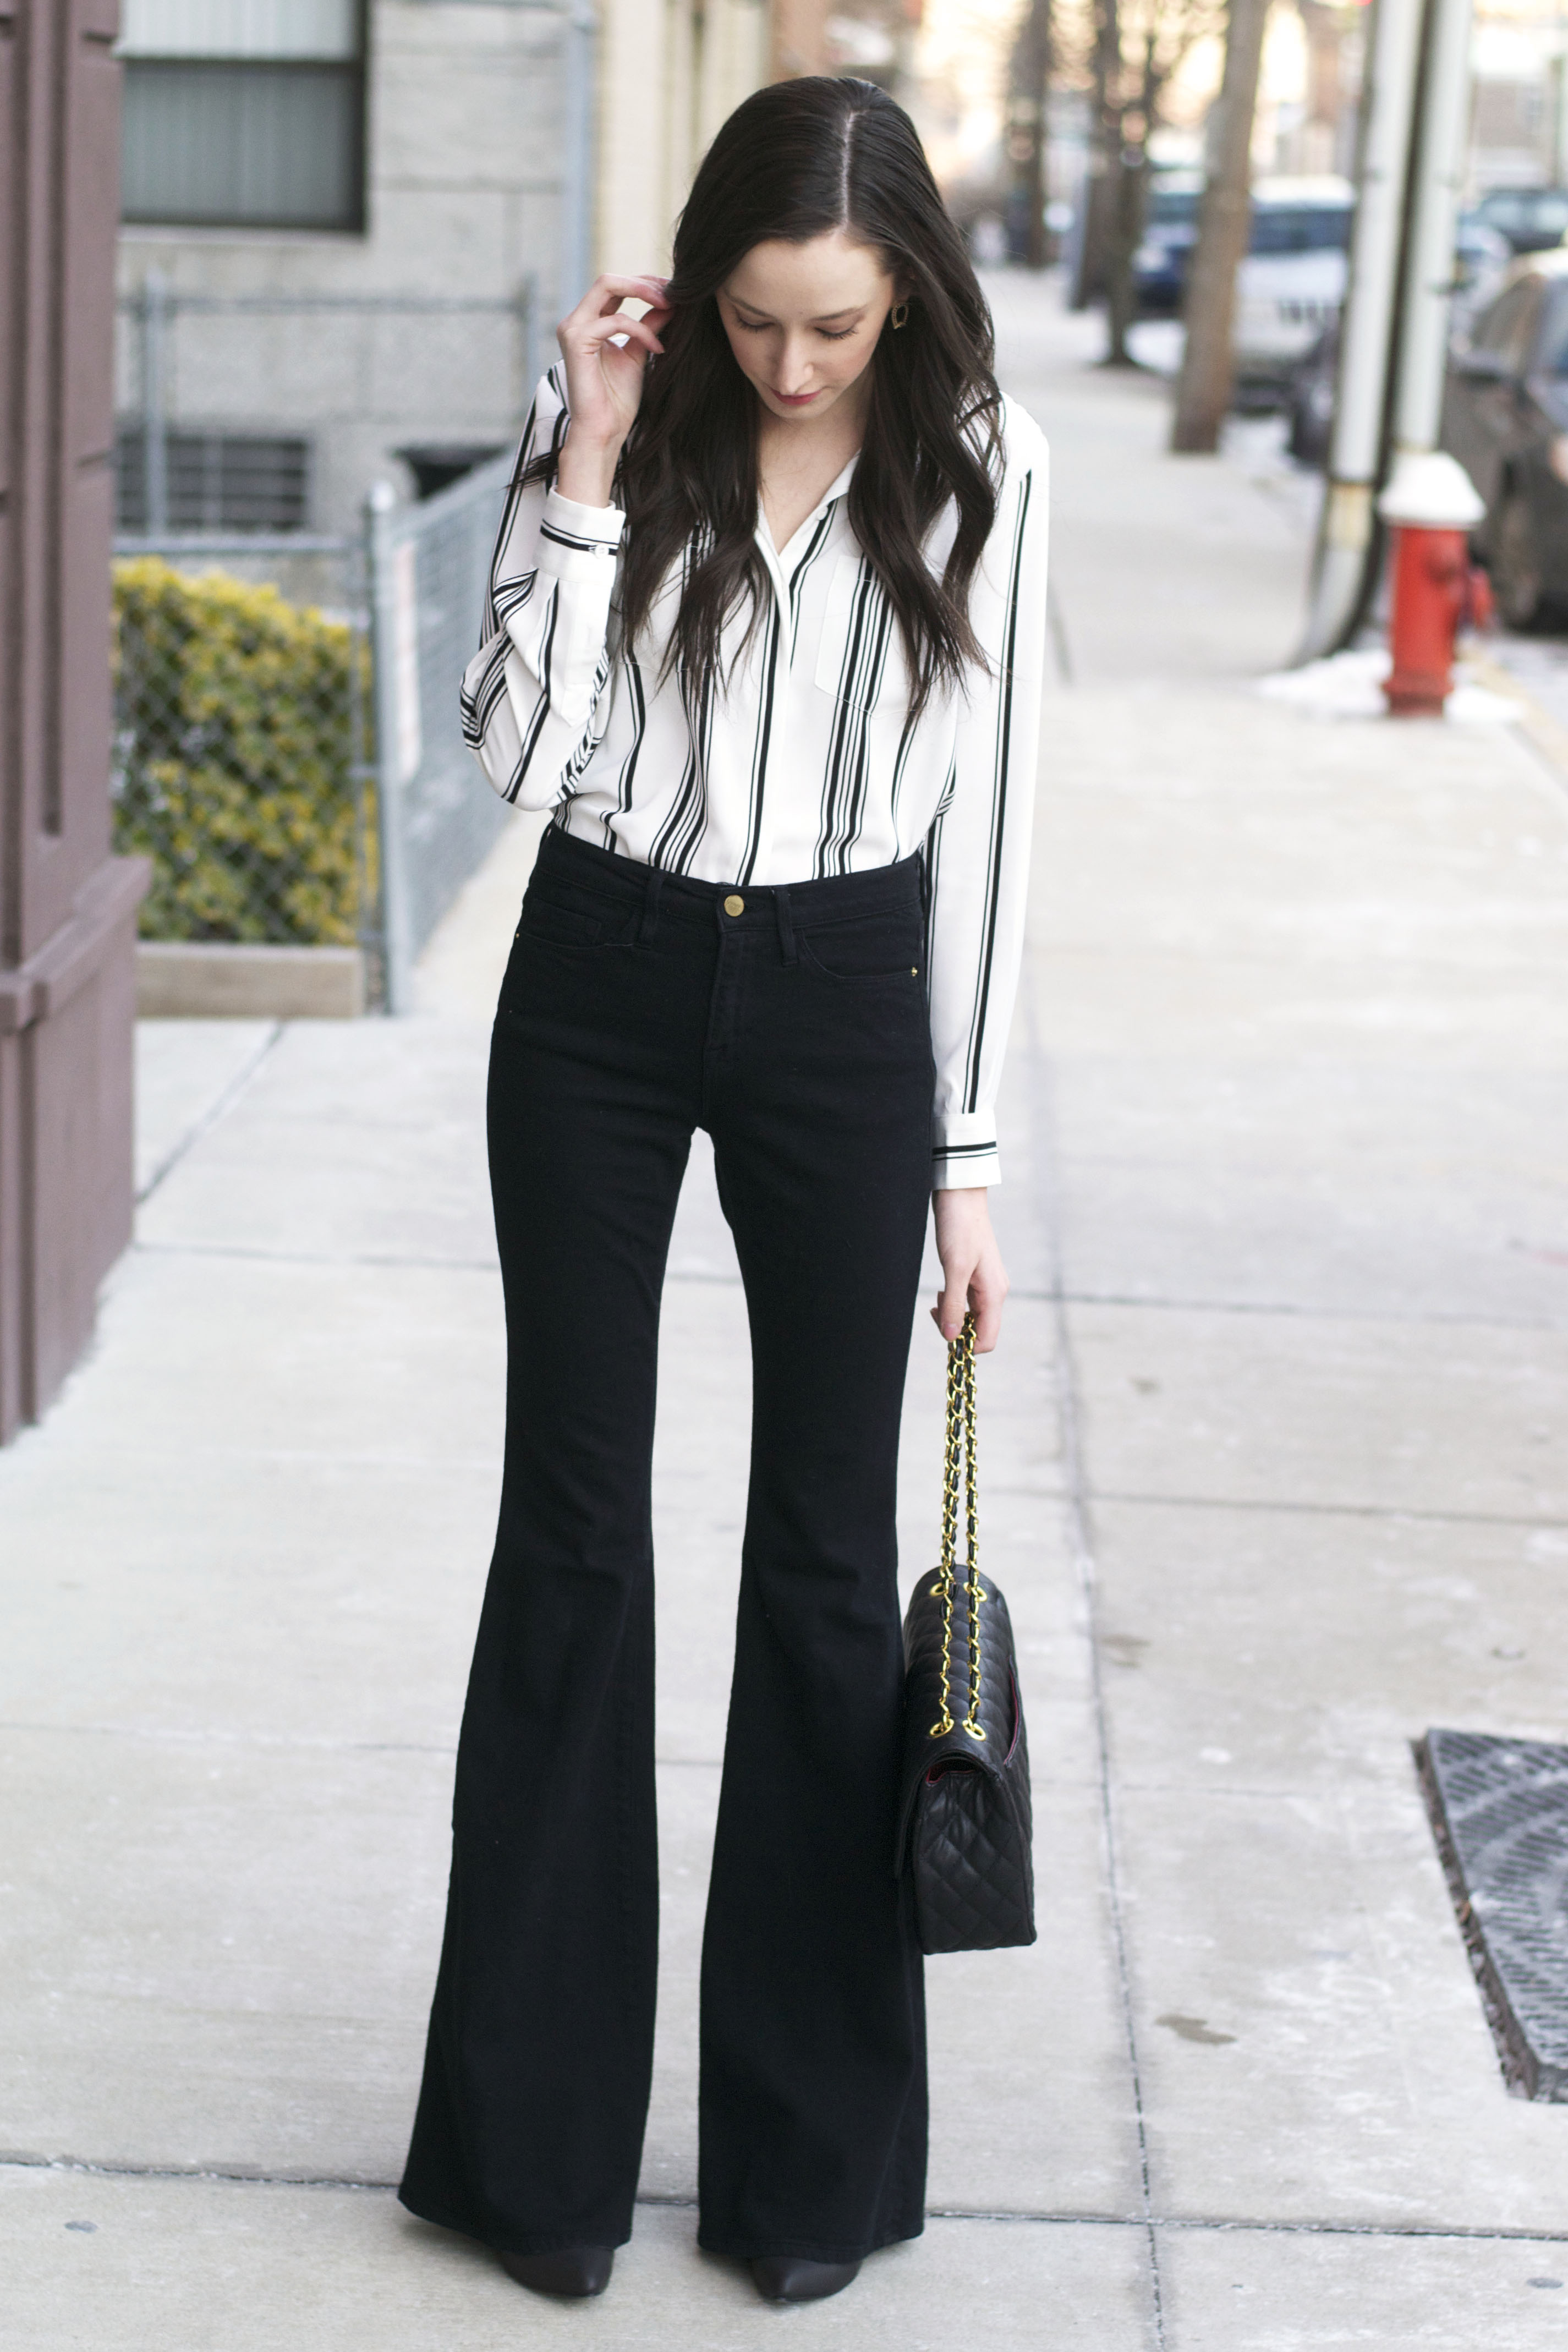 Stylish Ways To Wear Flare Jeans This Fall Fashion, Flared, 47% OFF